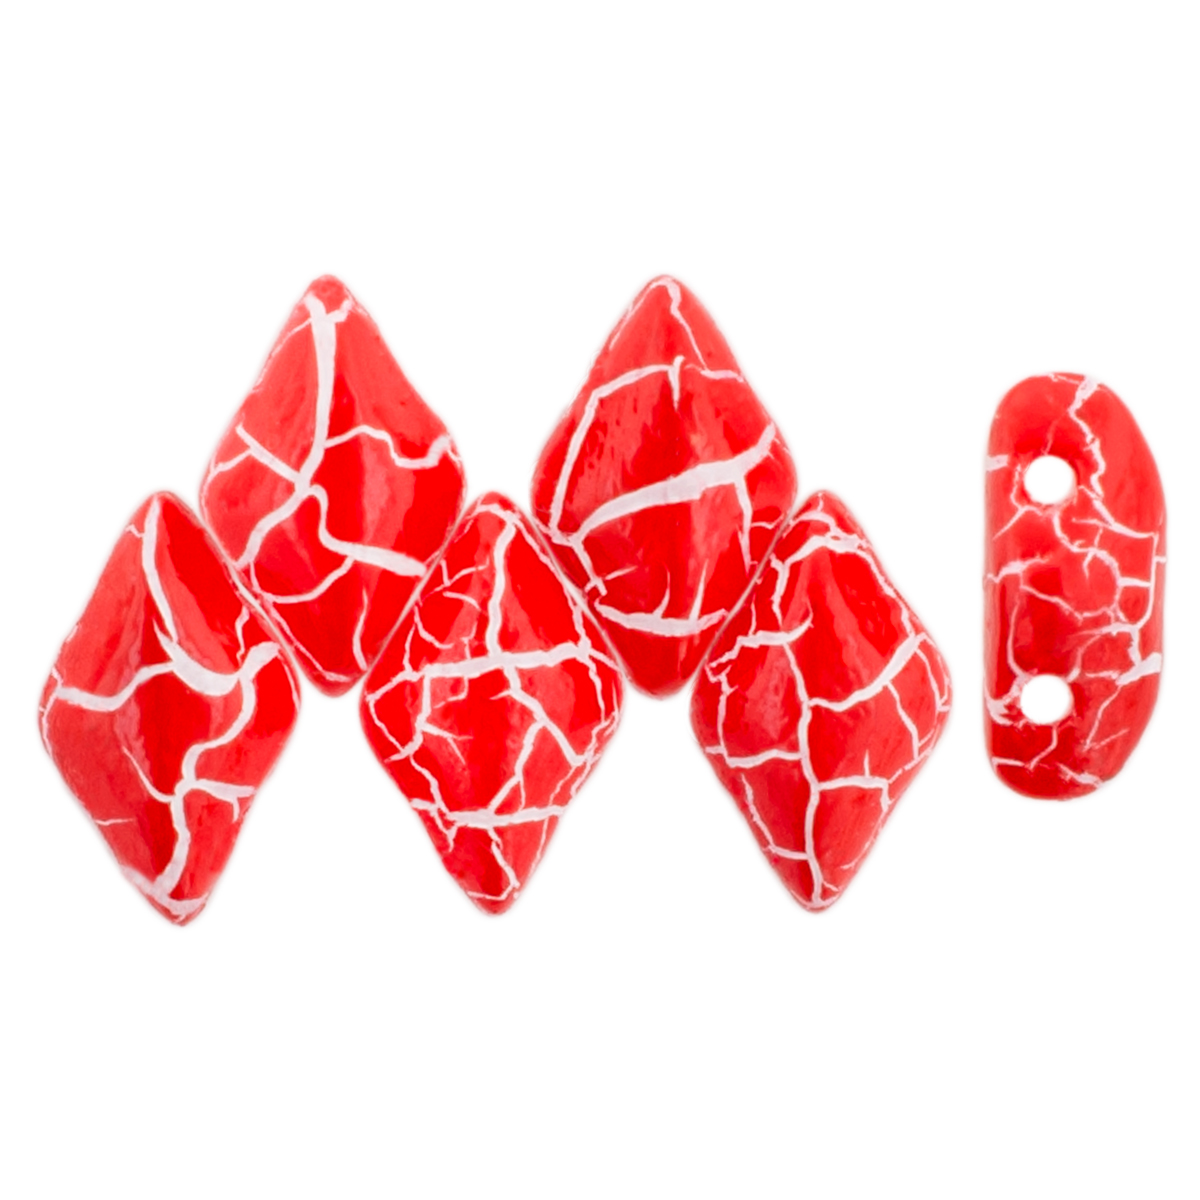 GEMDUO 8 x 5mm (loose) : Colortrends: Ionic Red/White